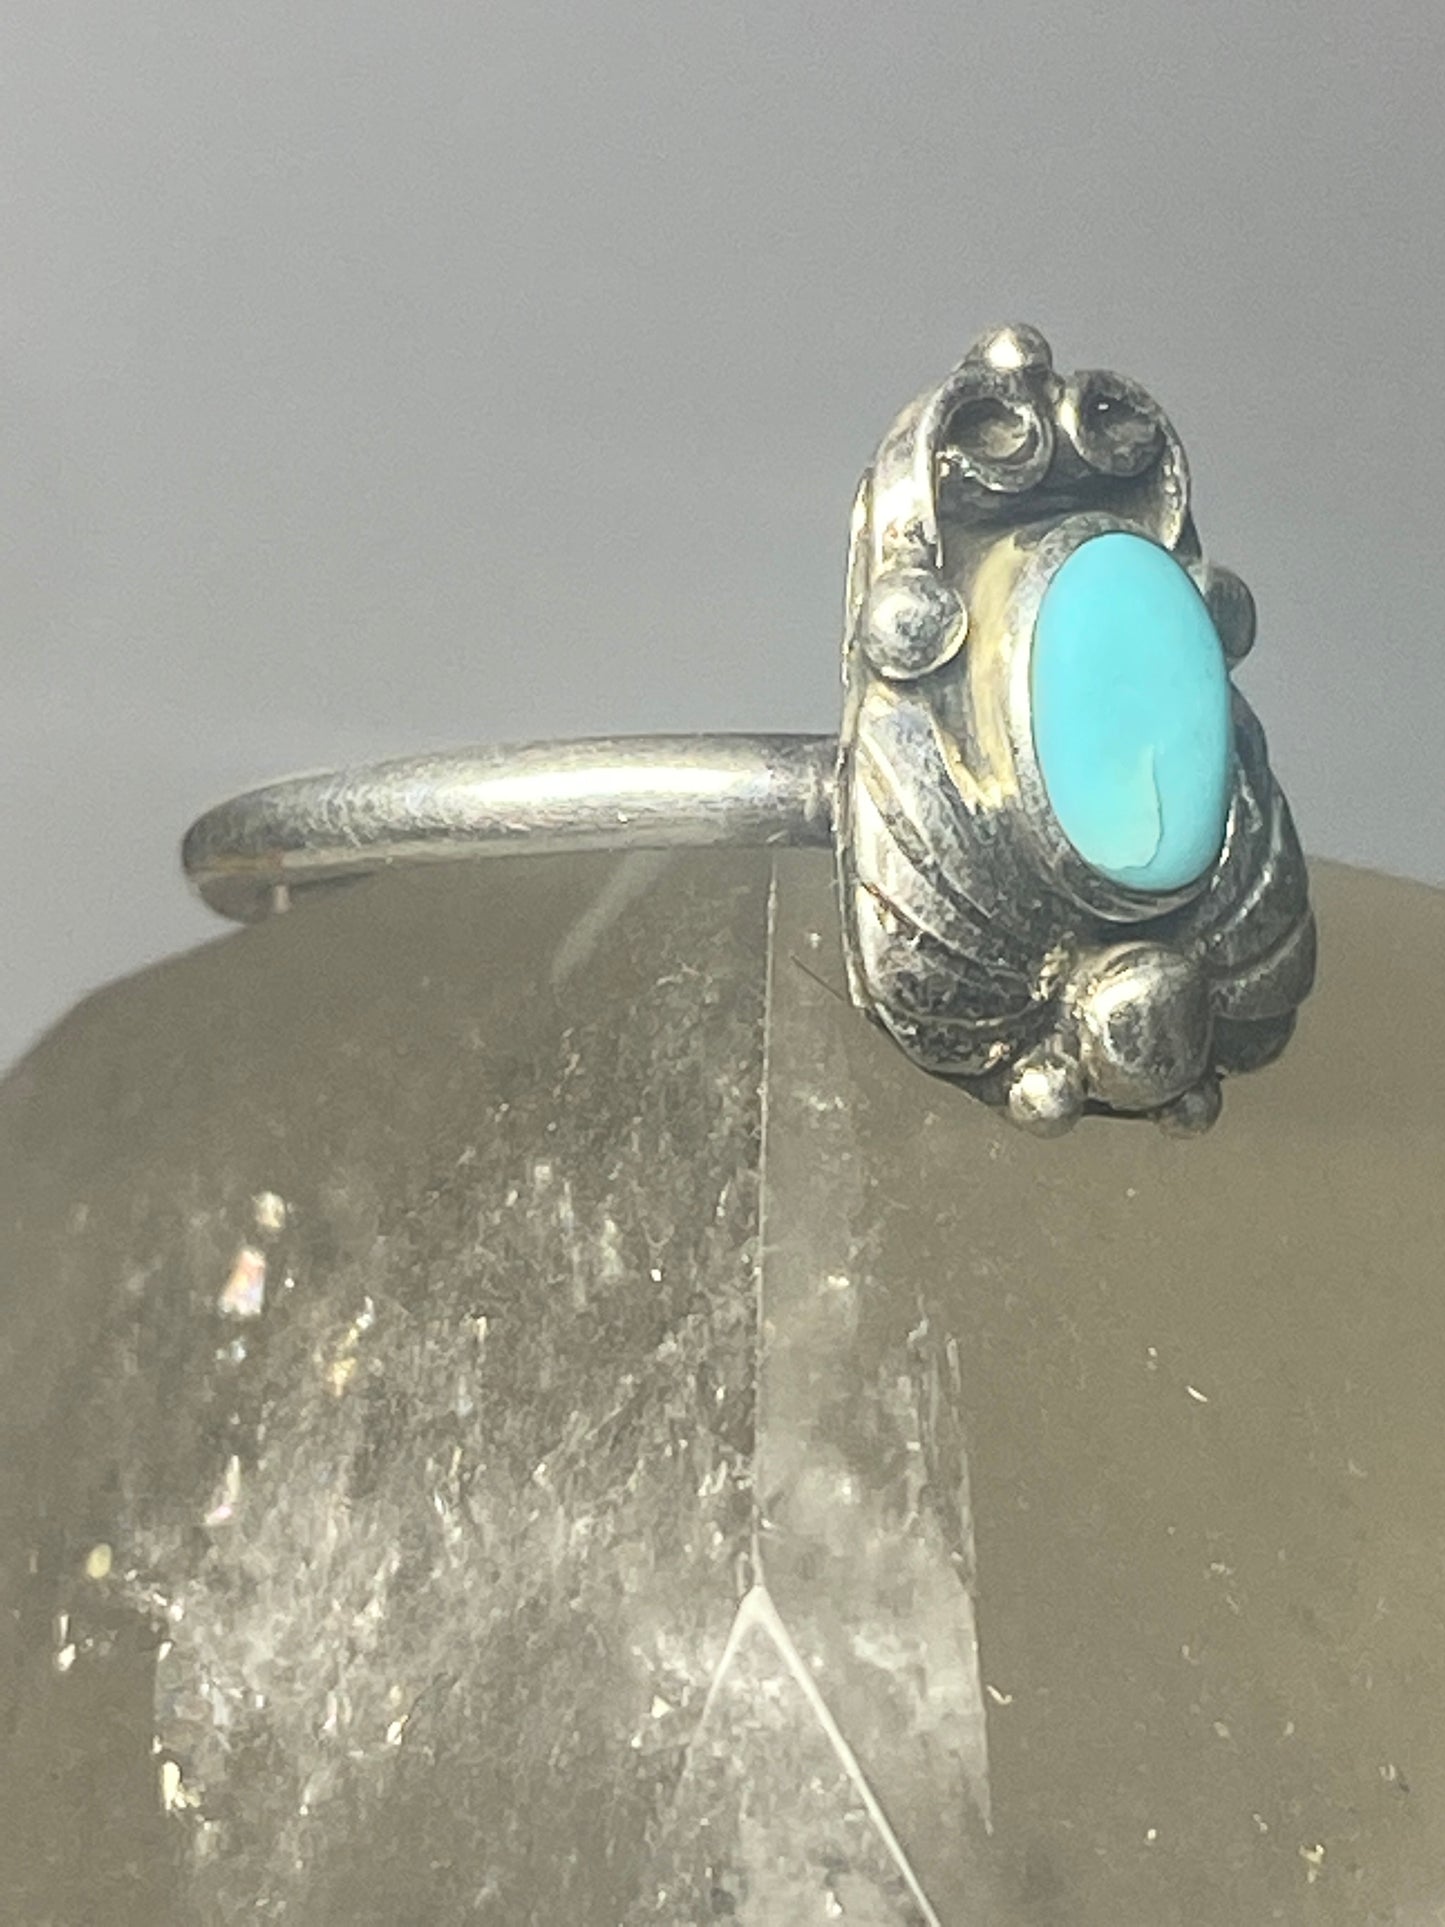 Turquoise ring leaves band southwest sterling silver women girls g